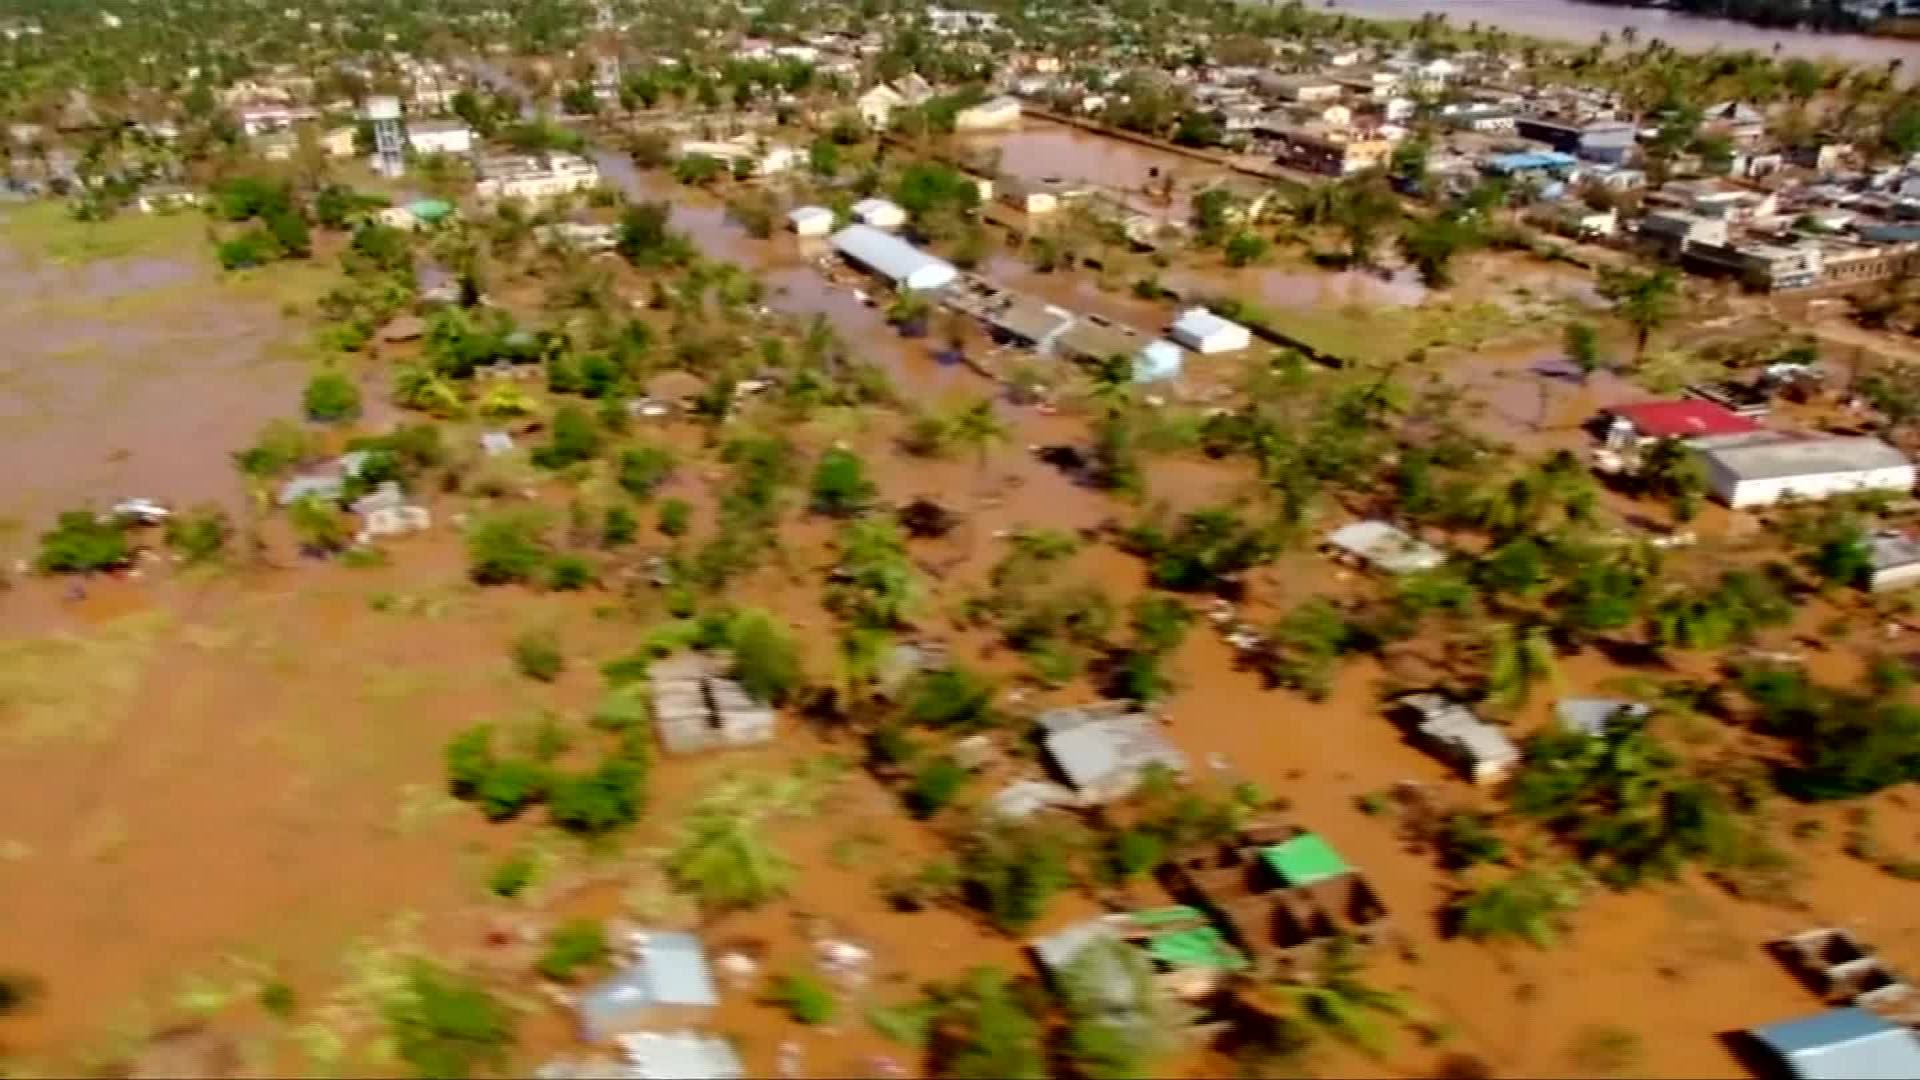 Cyclone Idai: 'Children died as they fell from trees, adults drowned when  they could hold on no longer